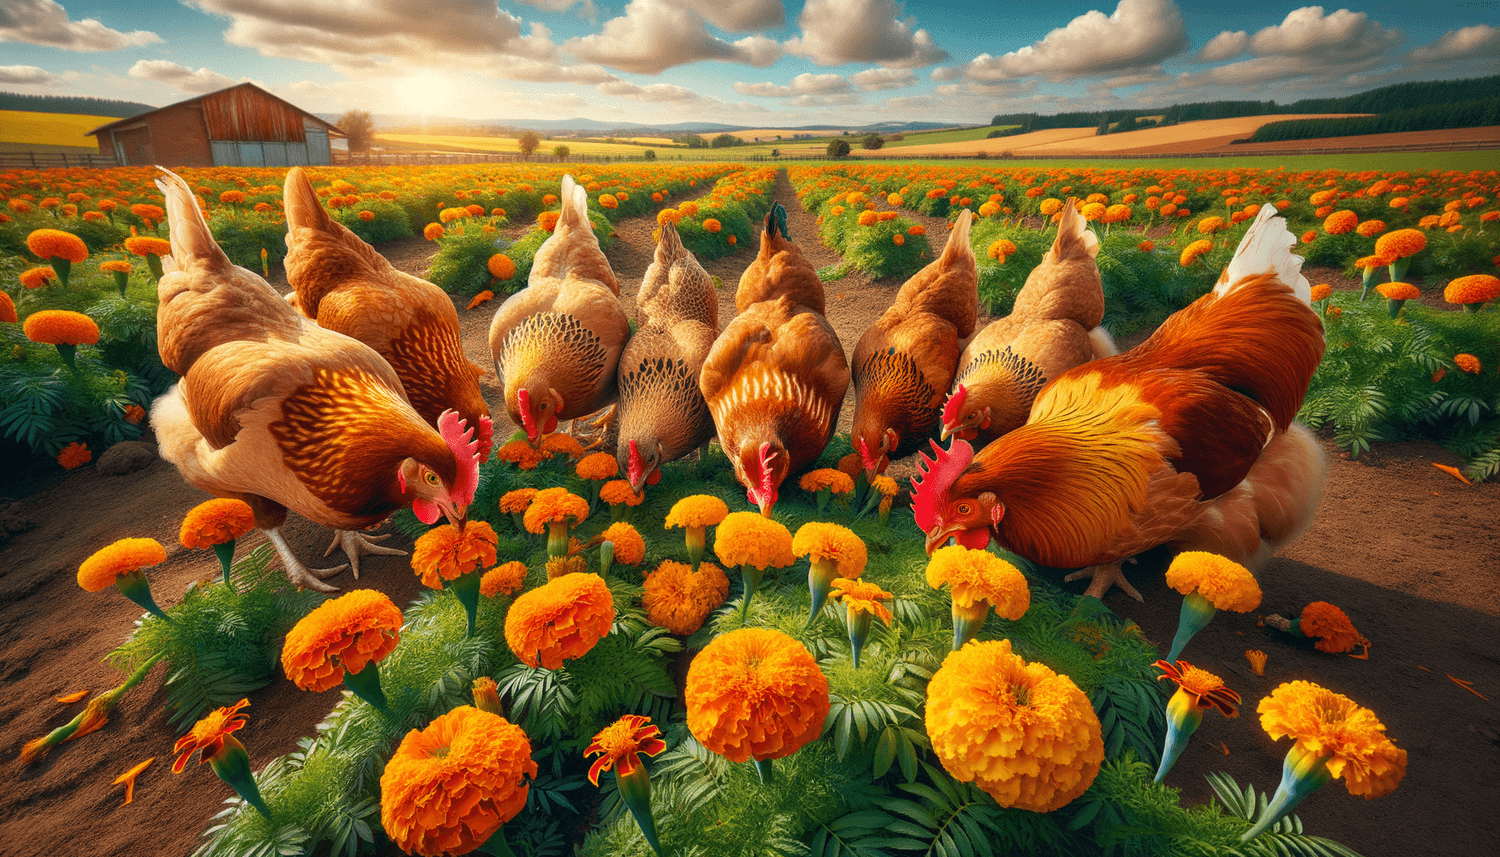 Can Chickens Eat Marigolds Flowers?